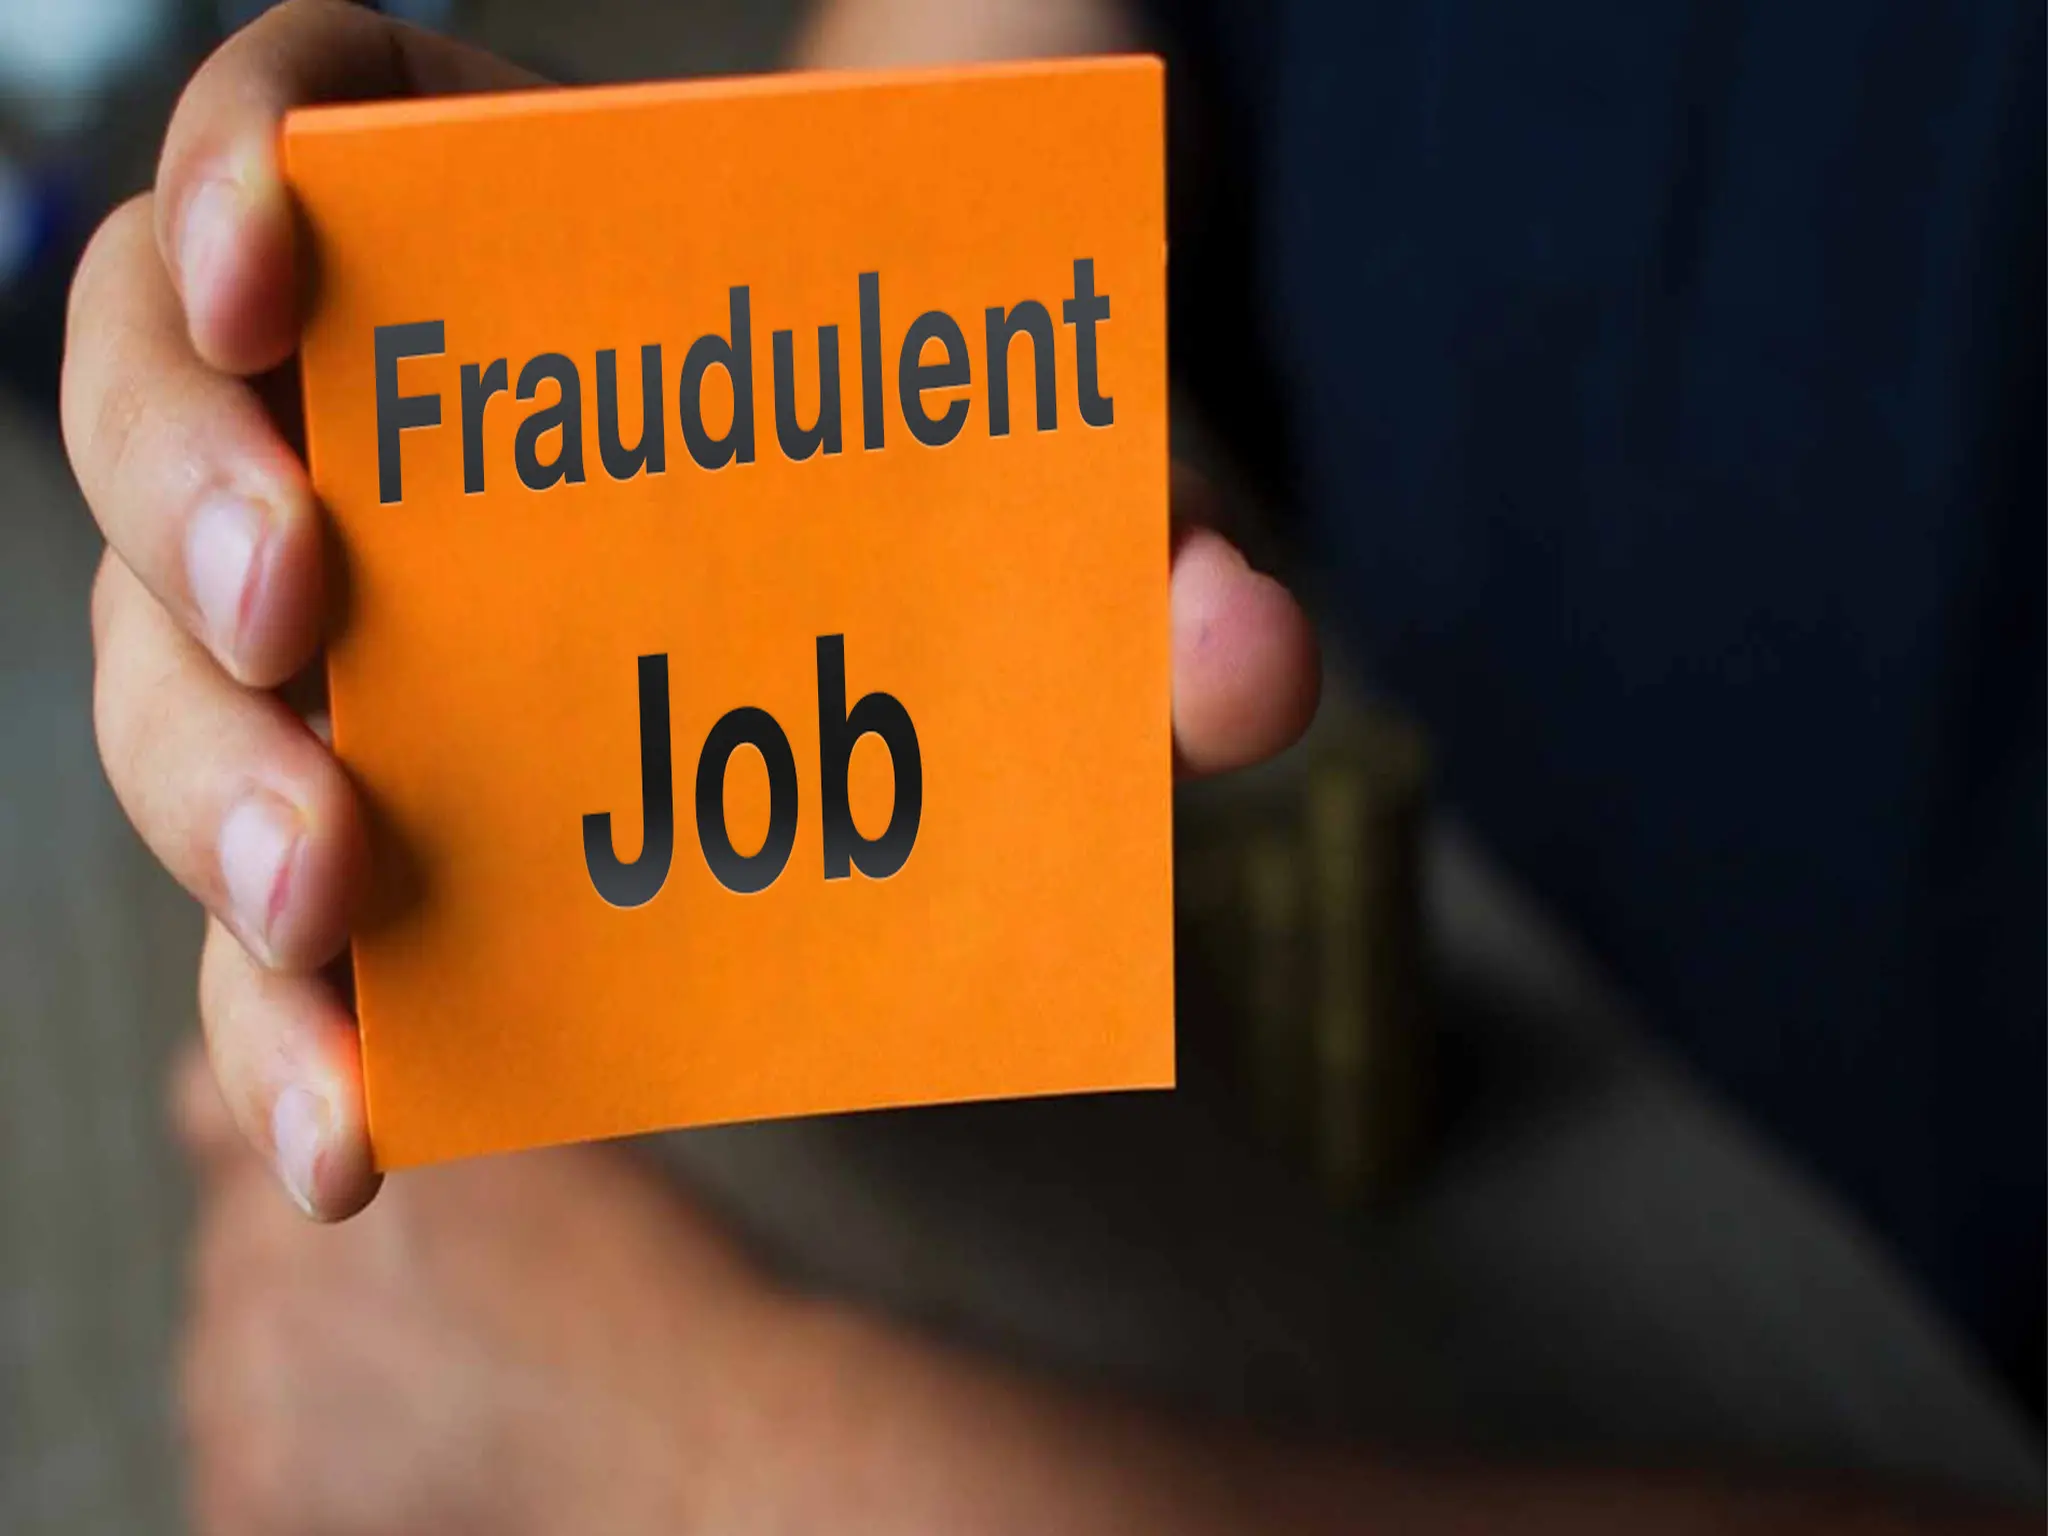 Canada issues urgent warning about fraudulent job offers